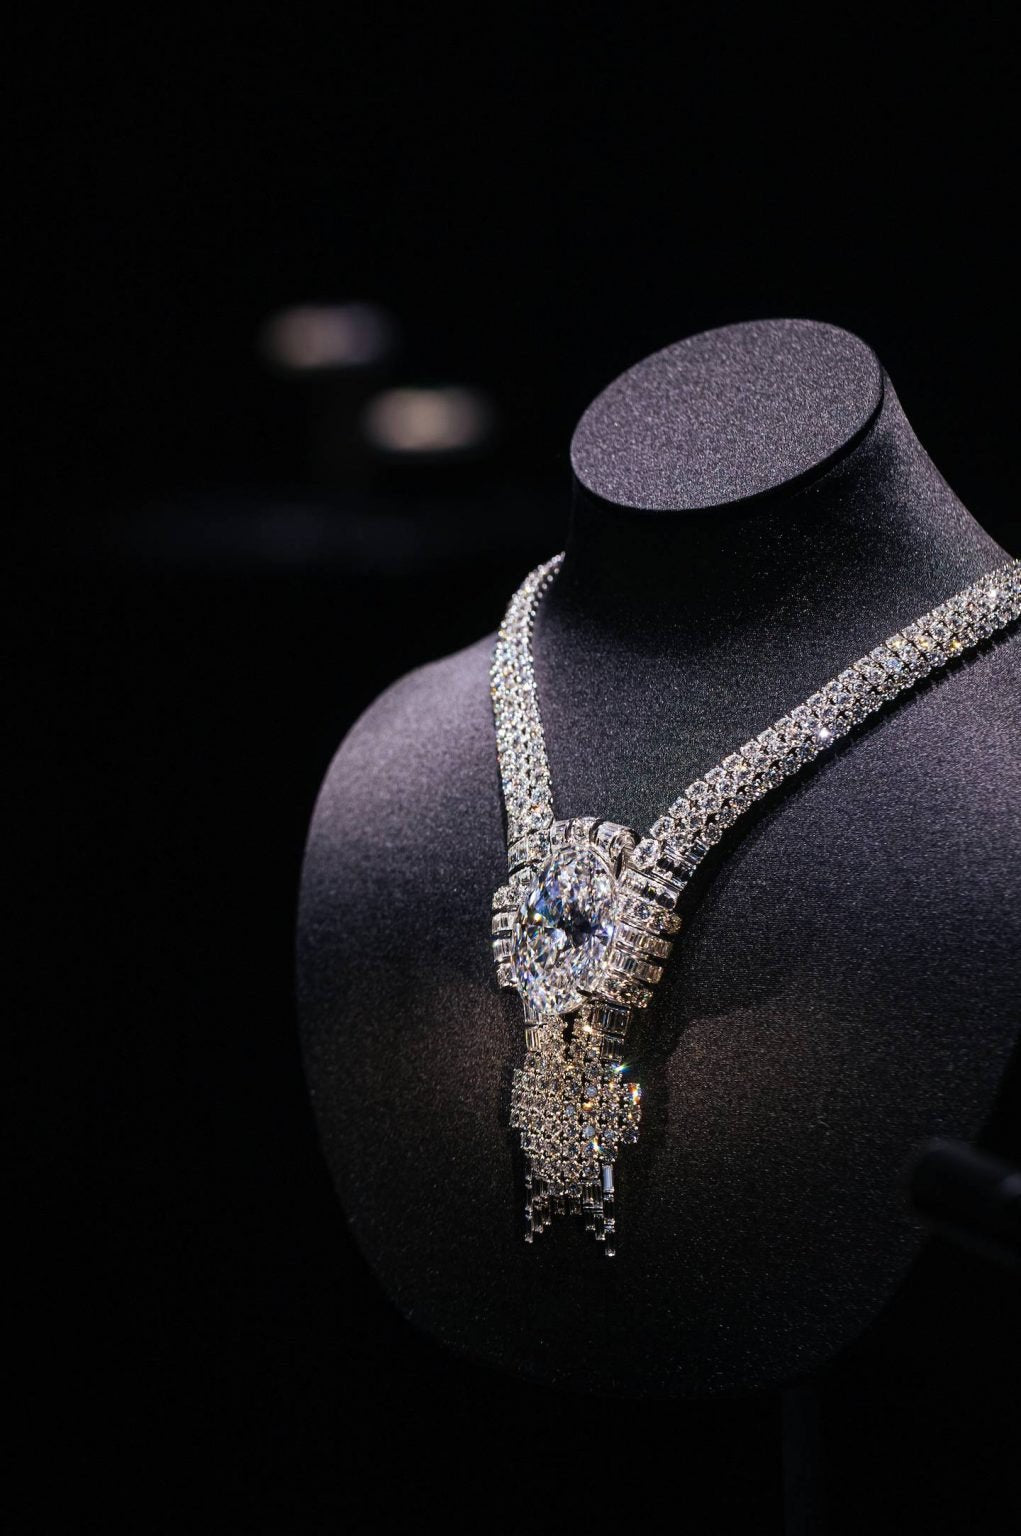 Tiffany Is Selling The Most Expensive Necklace In Its 184-Year History - DSF Antique Jewelry